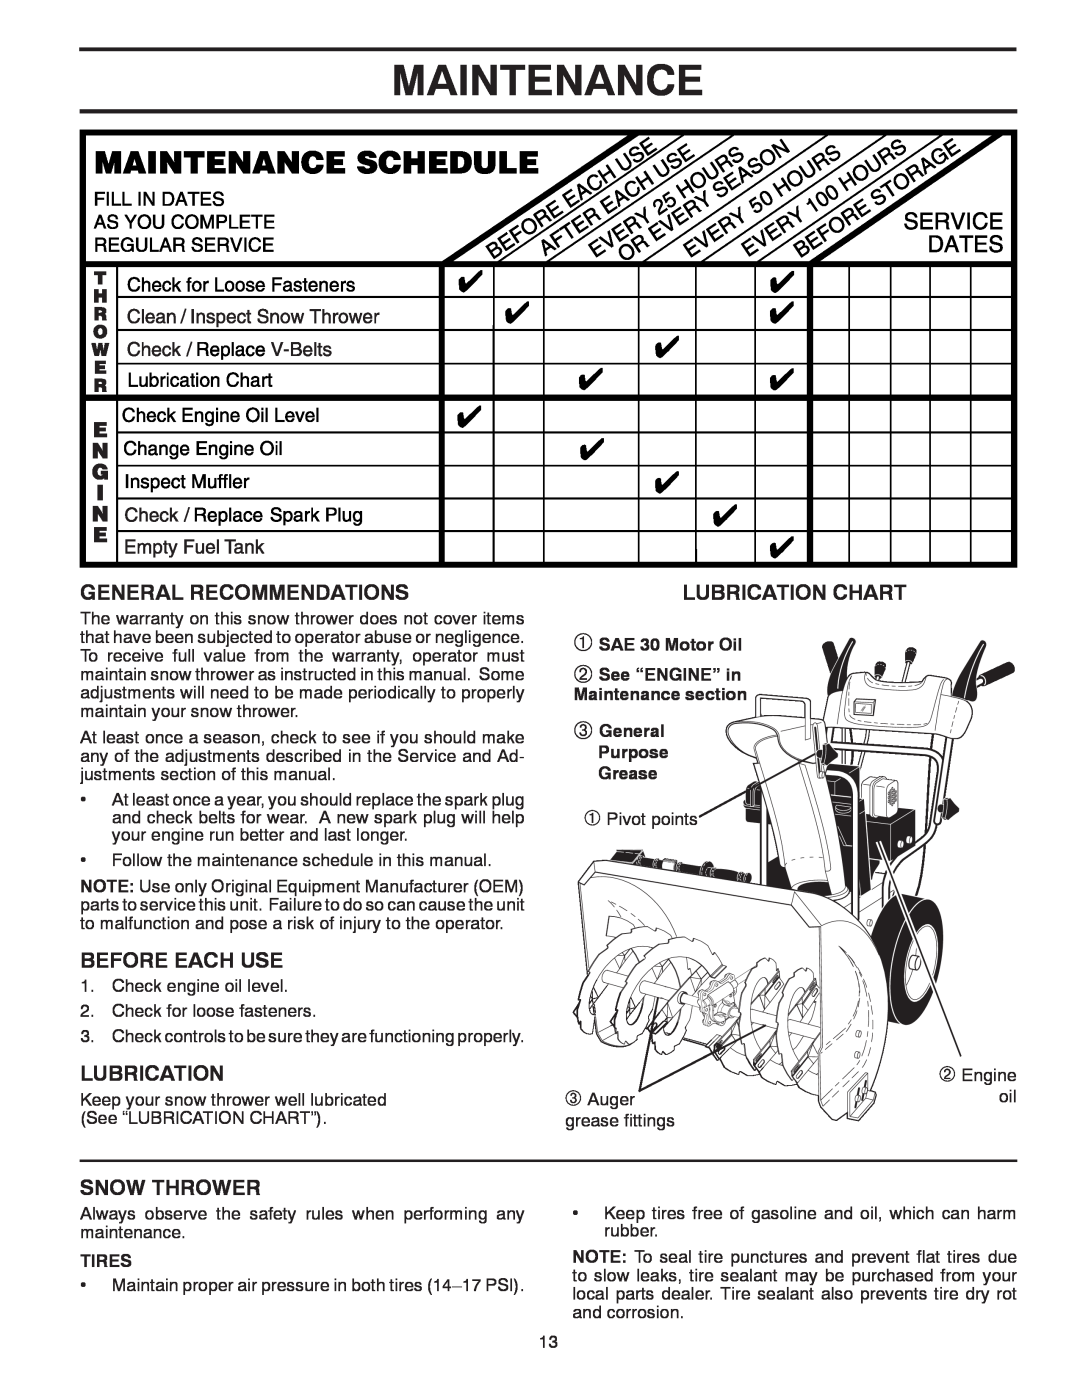 Poulan 96192003800 Maintenance, General Recommendations, Before Each Use, Snow Thrower, Lubrication Chart, Tires 